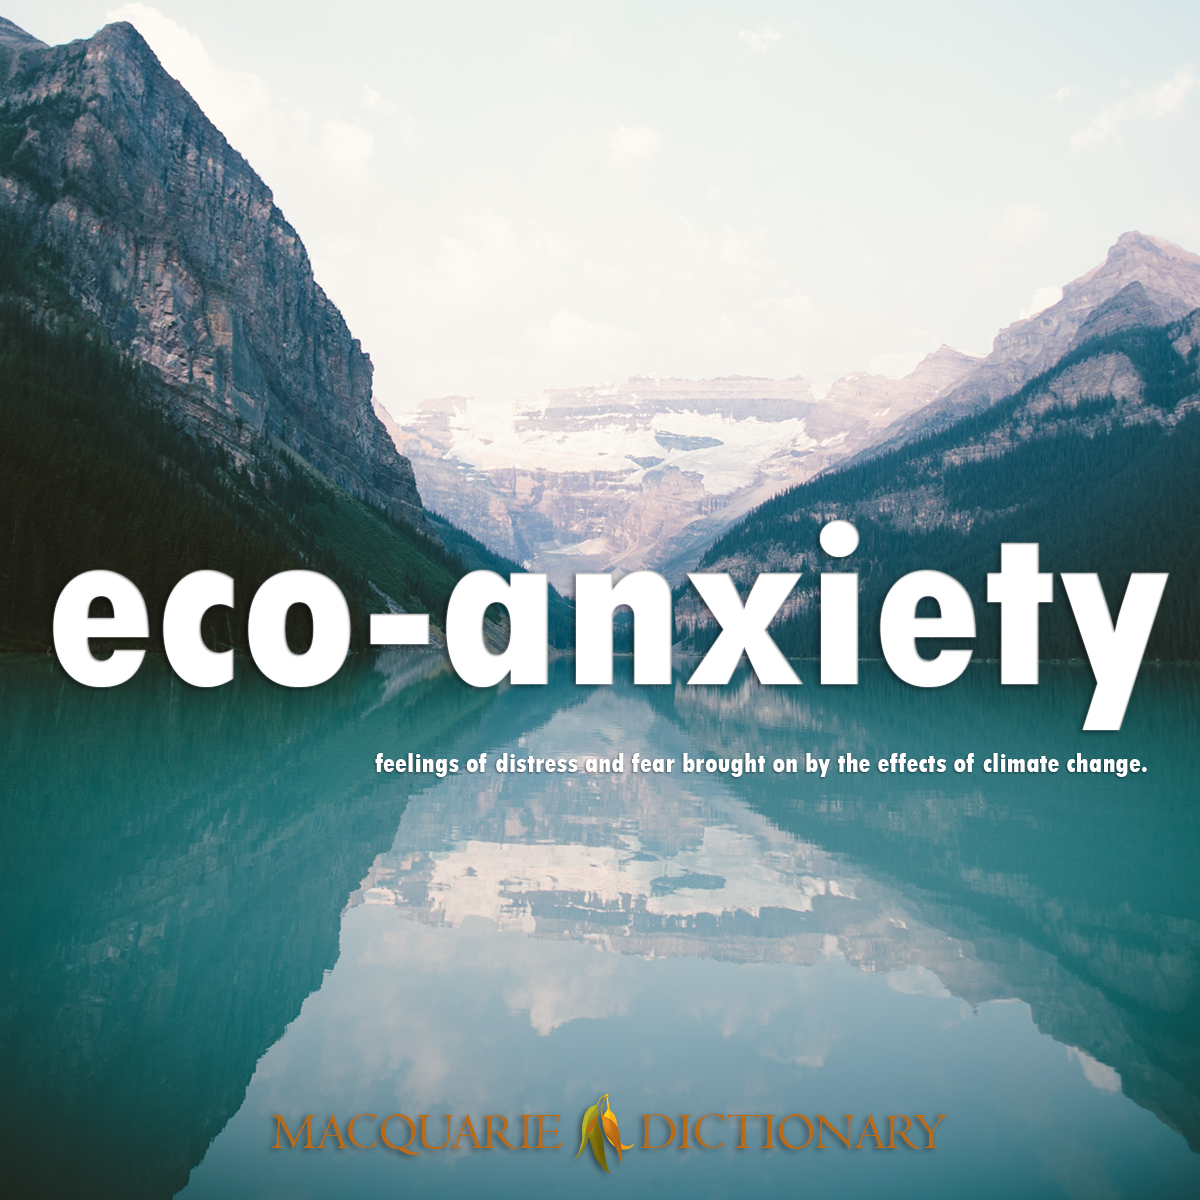 Image of Word of the Year Macquarie Dictionary eco-anxiety feelings of distress and fear brought on by the effects of climate change.